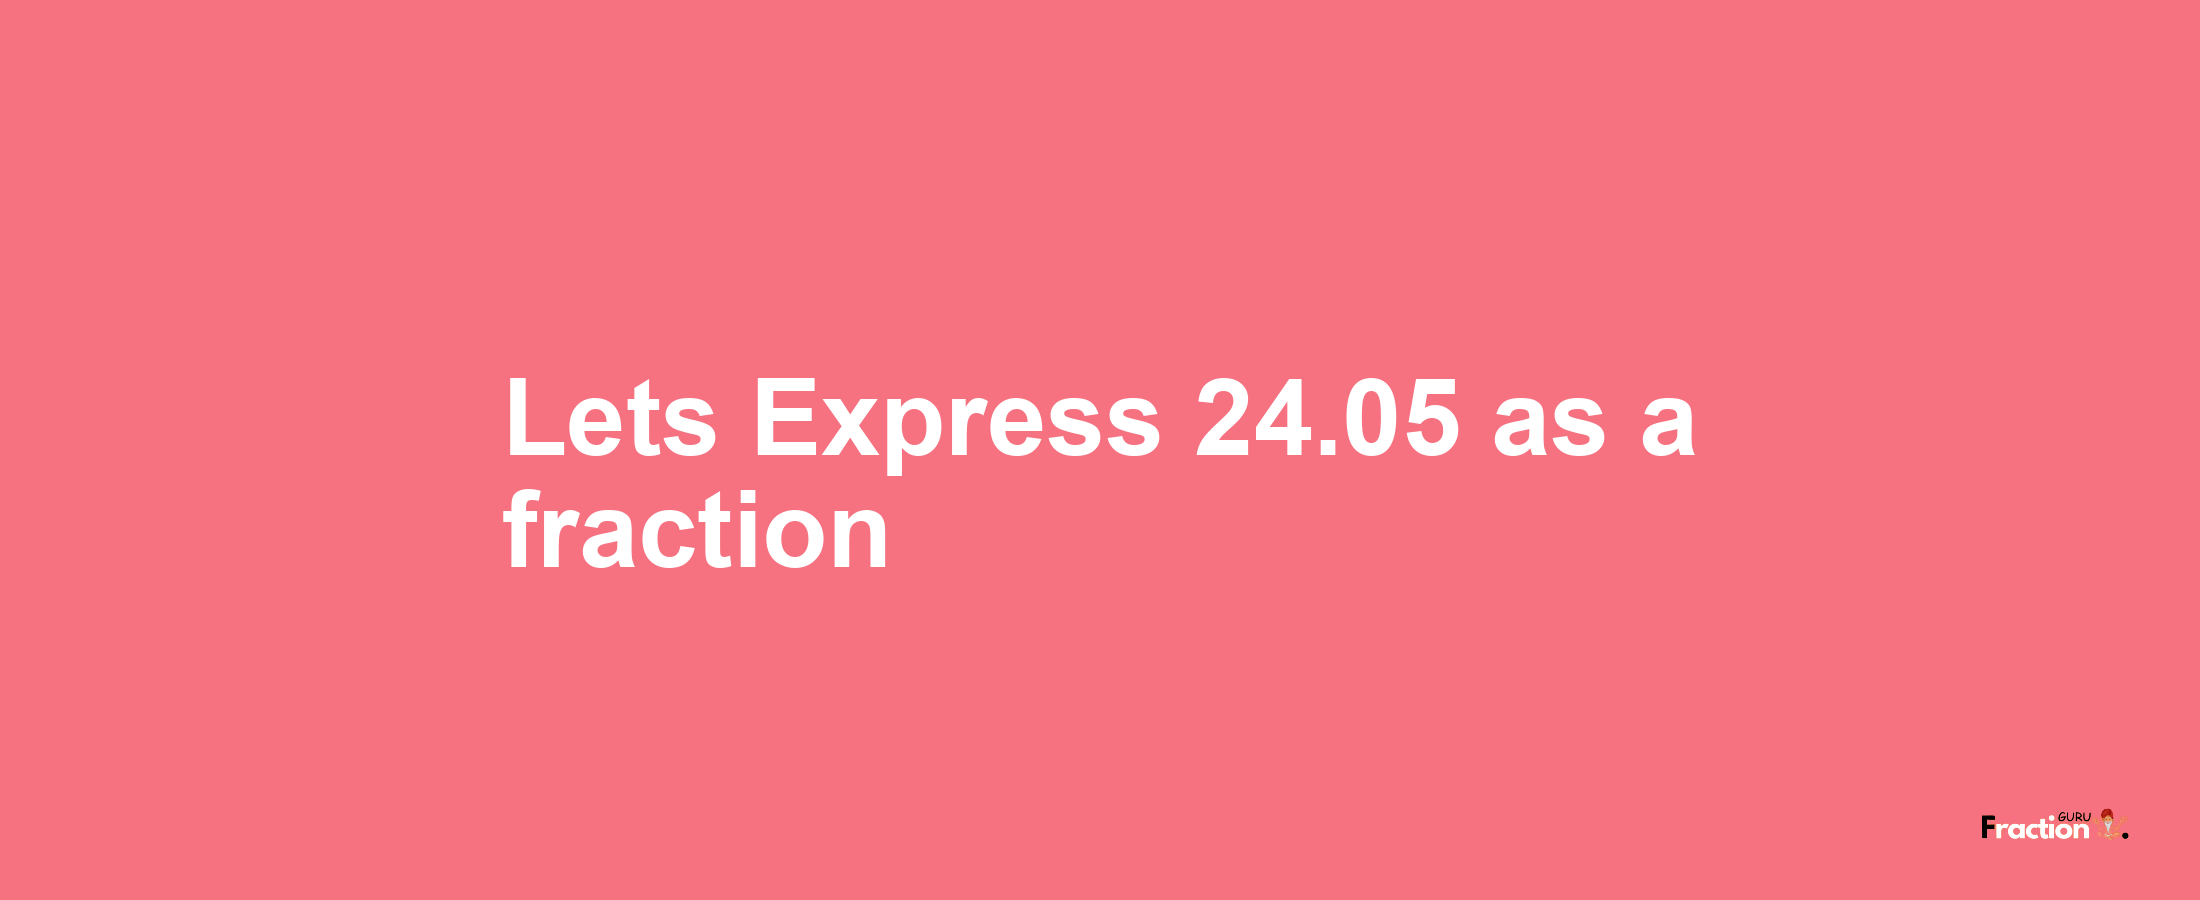 Lets Express 24.05 as afraction